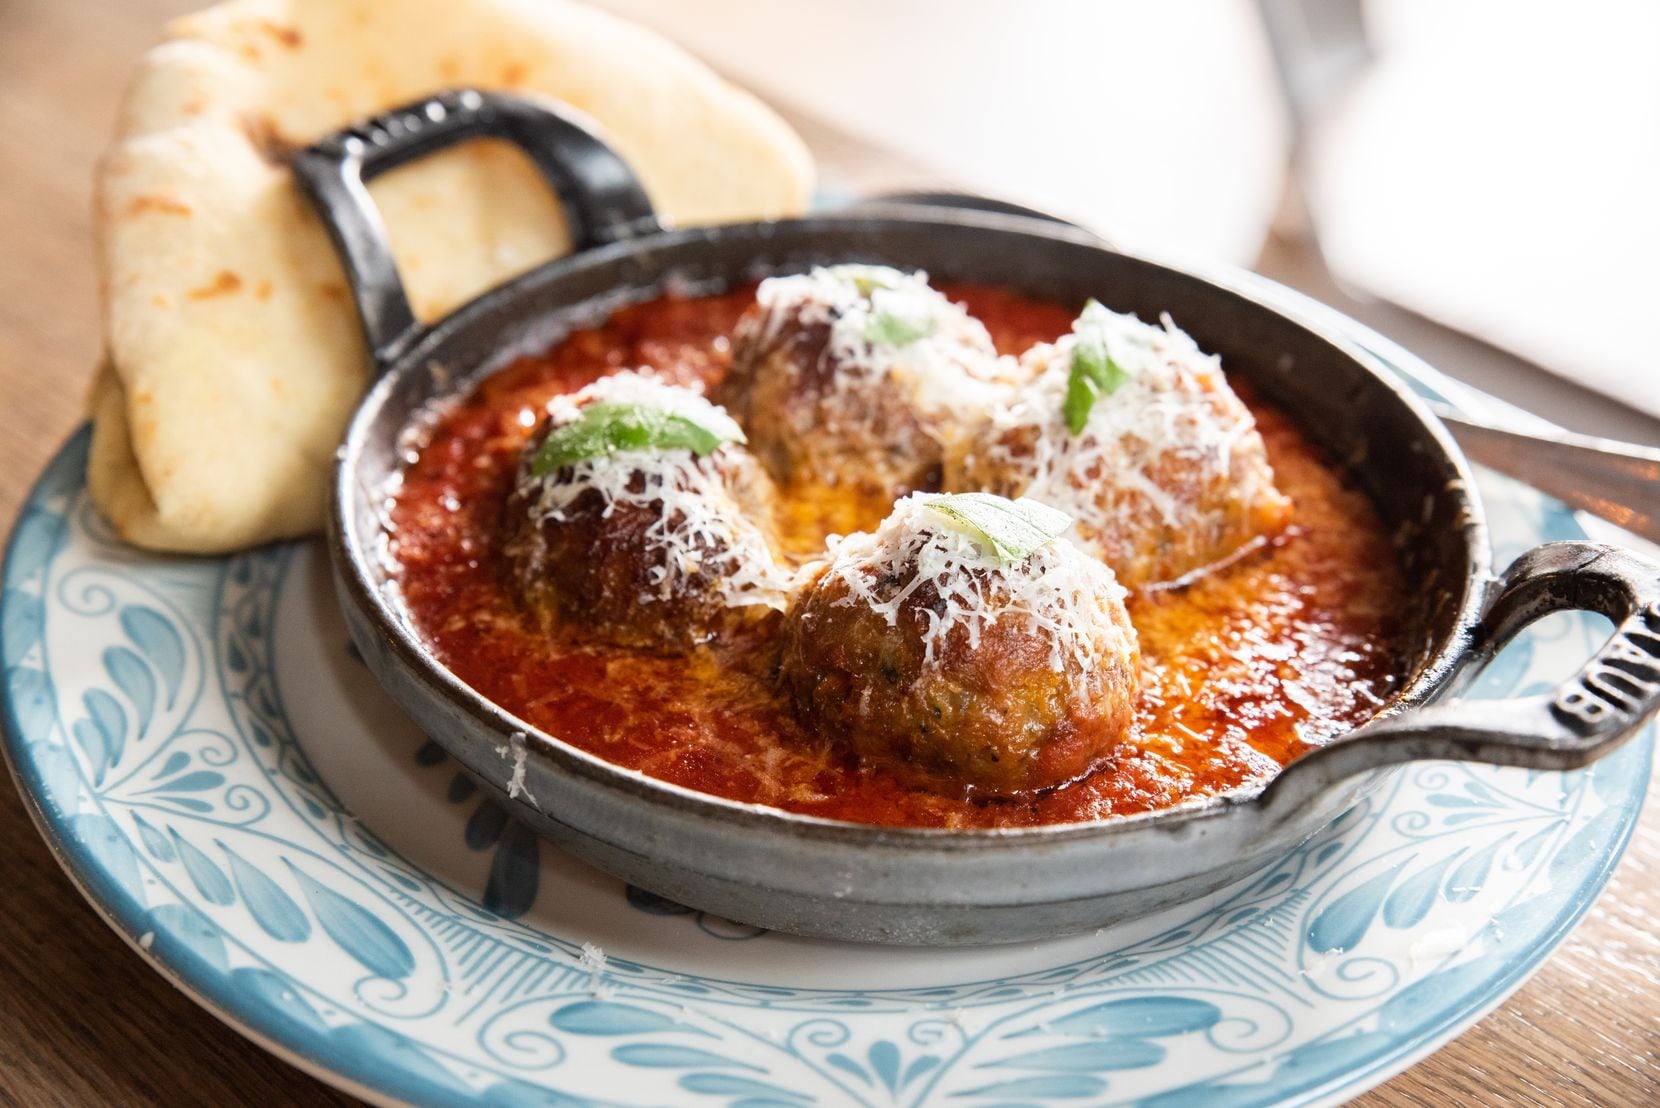 Etta is a restaurant opening in downtown Dallas' East Quarter in 2022, in the same development where Nick Badovinus' newish restaurant National Anthem opened in 2021. The menu includes spicy meatballs with Sunday sauce, pecorino cheese and hearth bread.